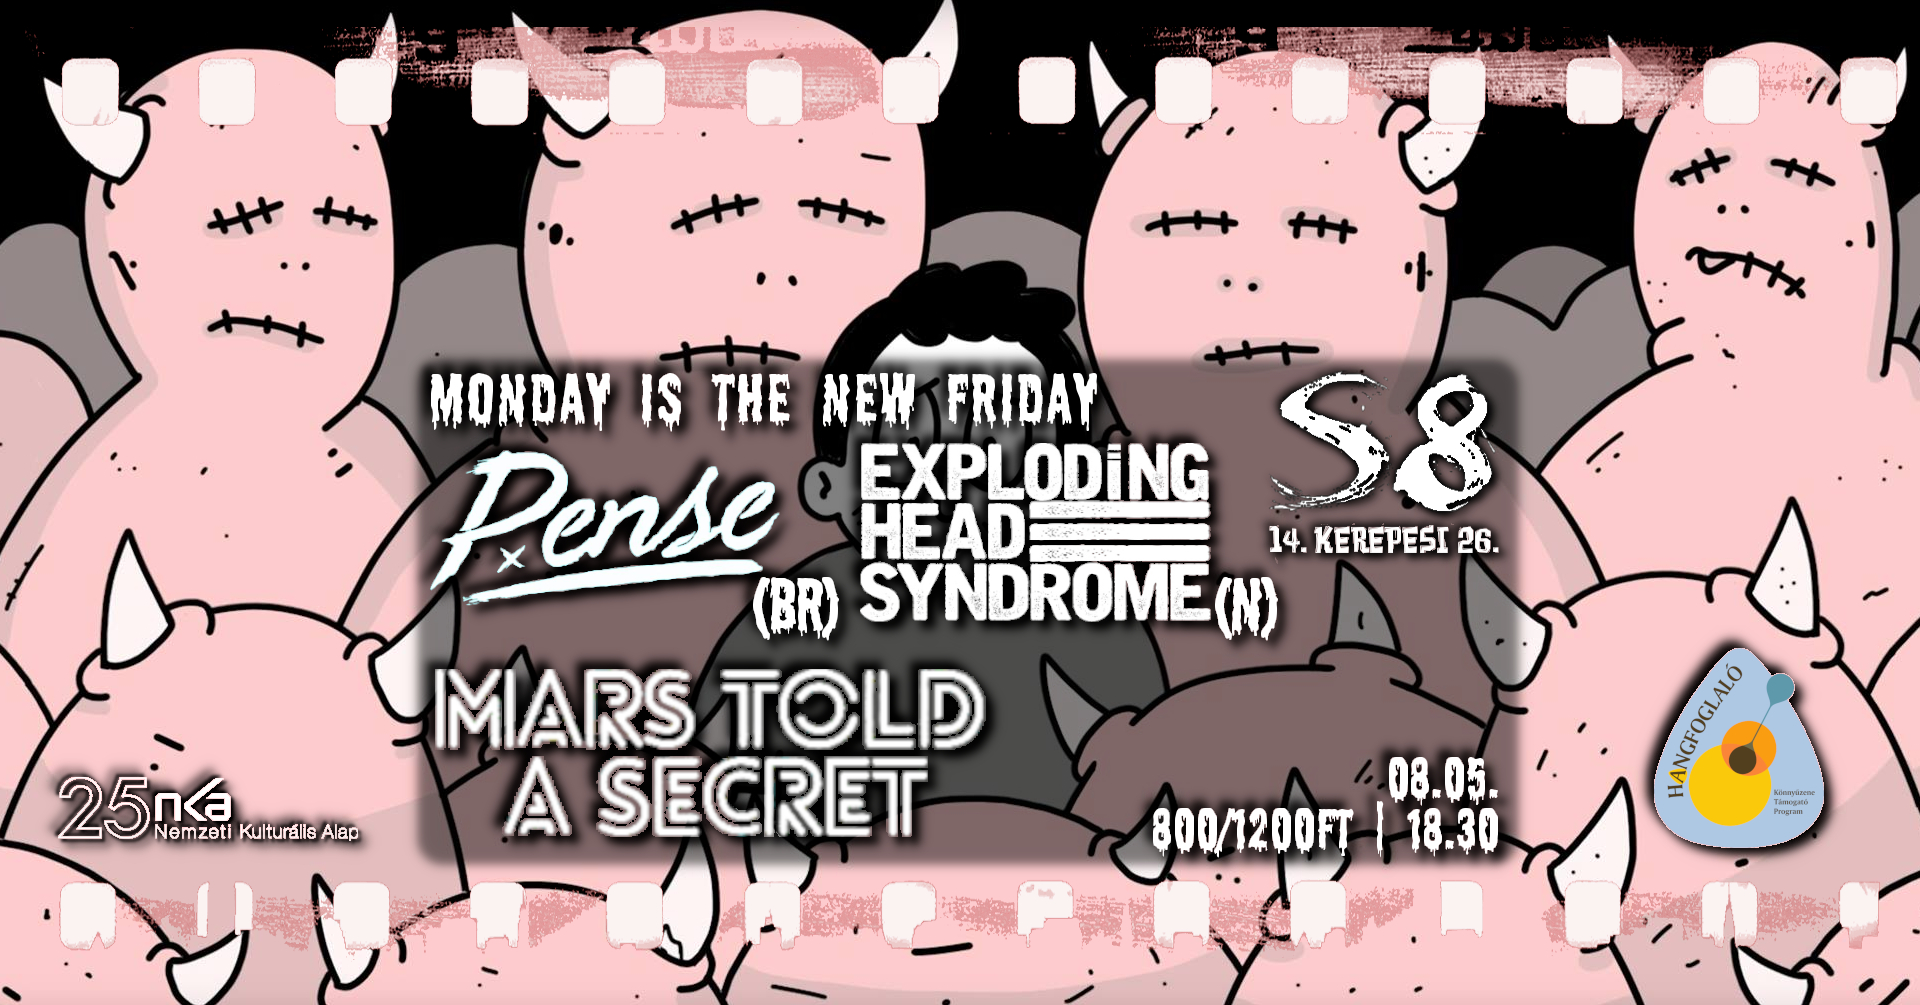 Monday is the new Friday - Pense [BR] I Exploding Head Syndrome [N] I Mars Told a Secret